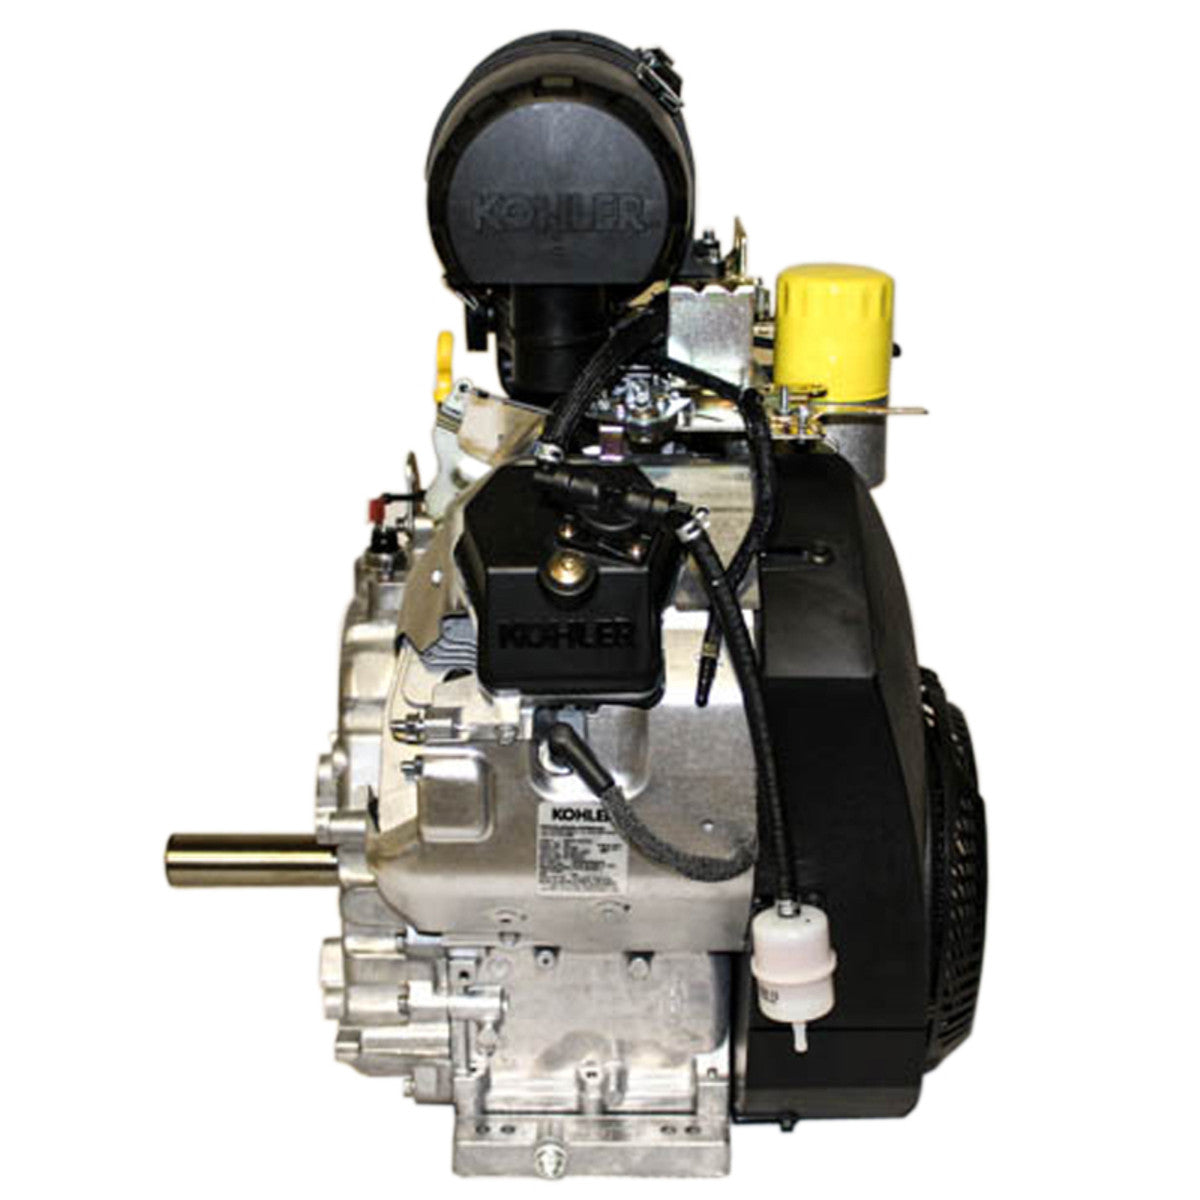 Kohler Command Pro 37HP Replacement Engine #CH1000-3000